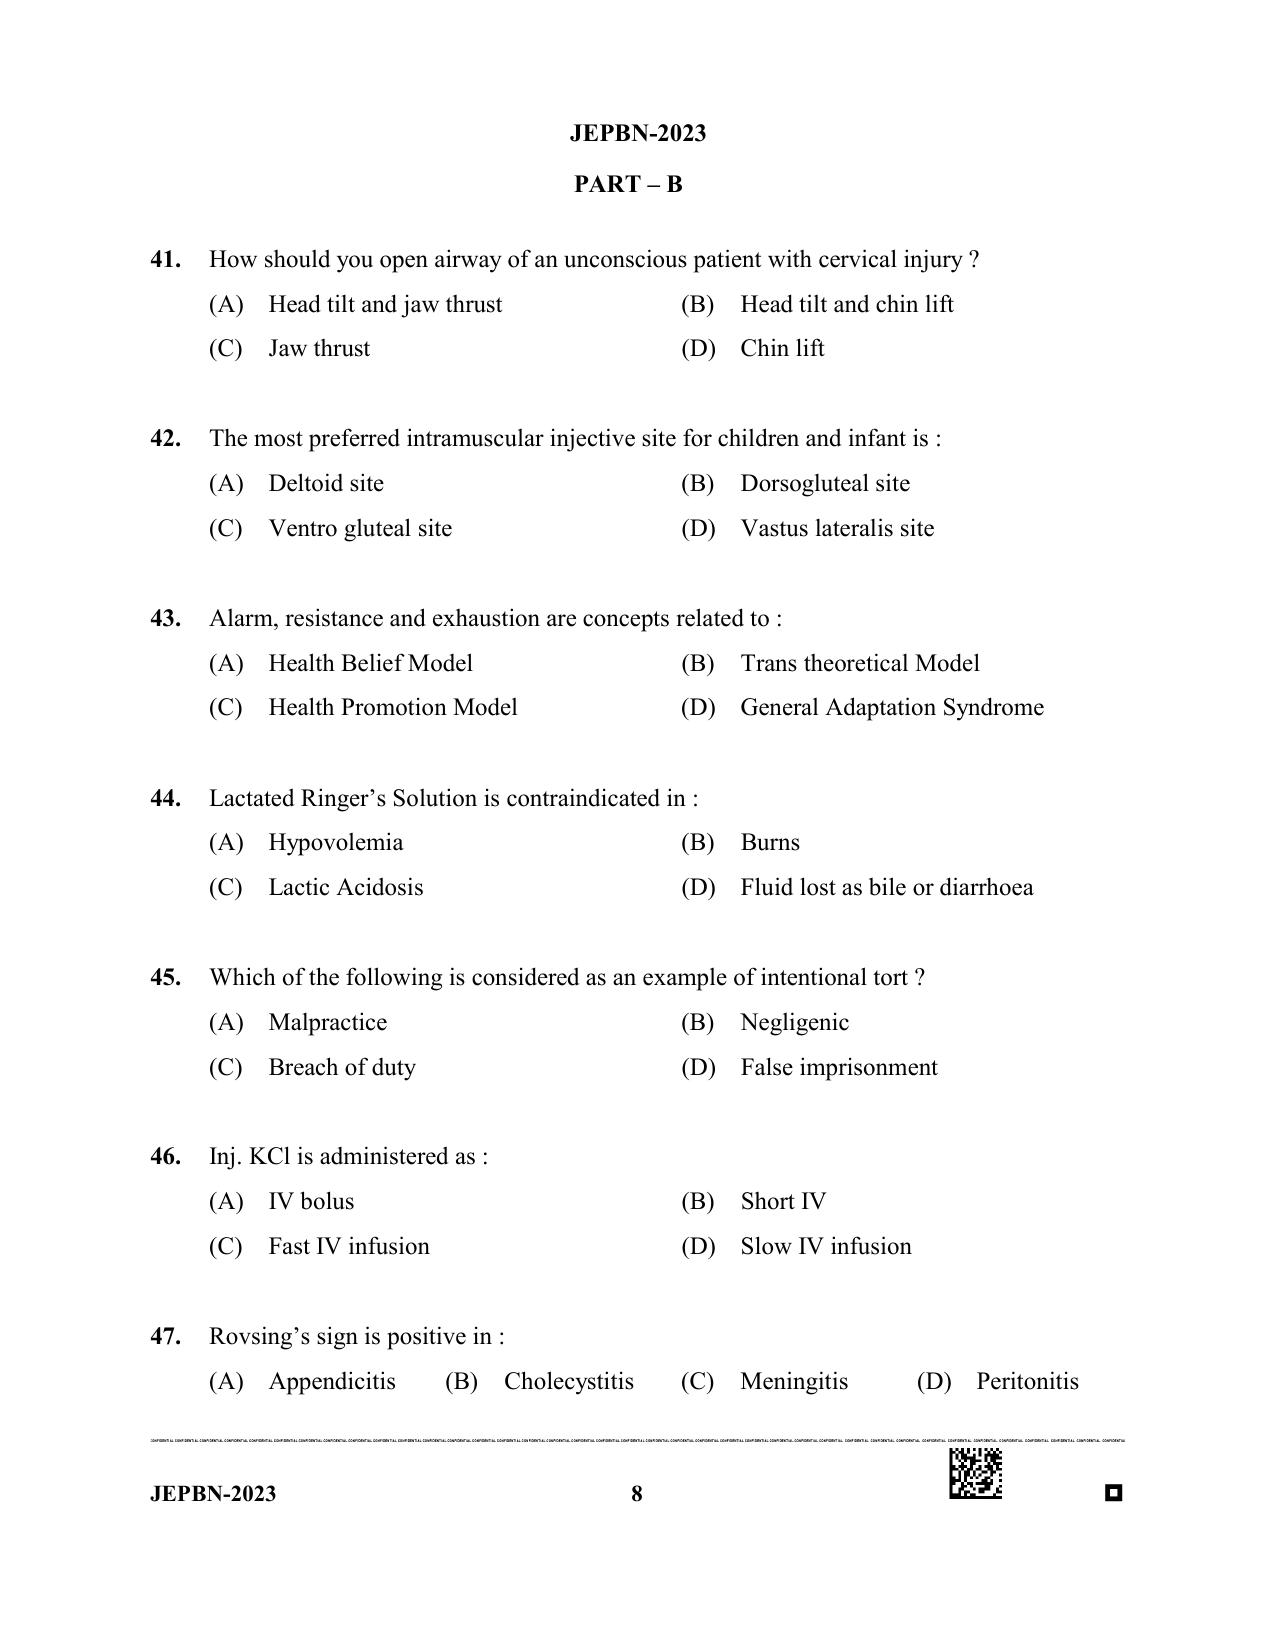 WBJEE JEPBN 2023 Question Paper - Page 8